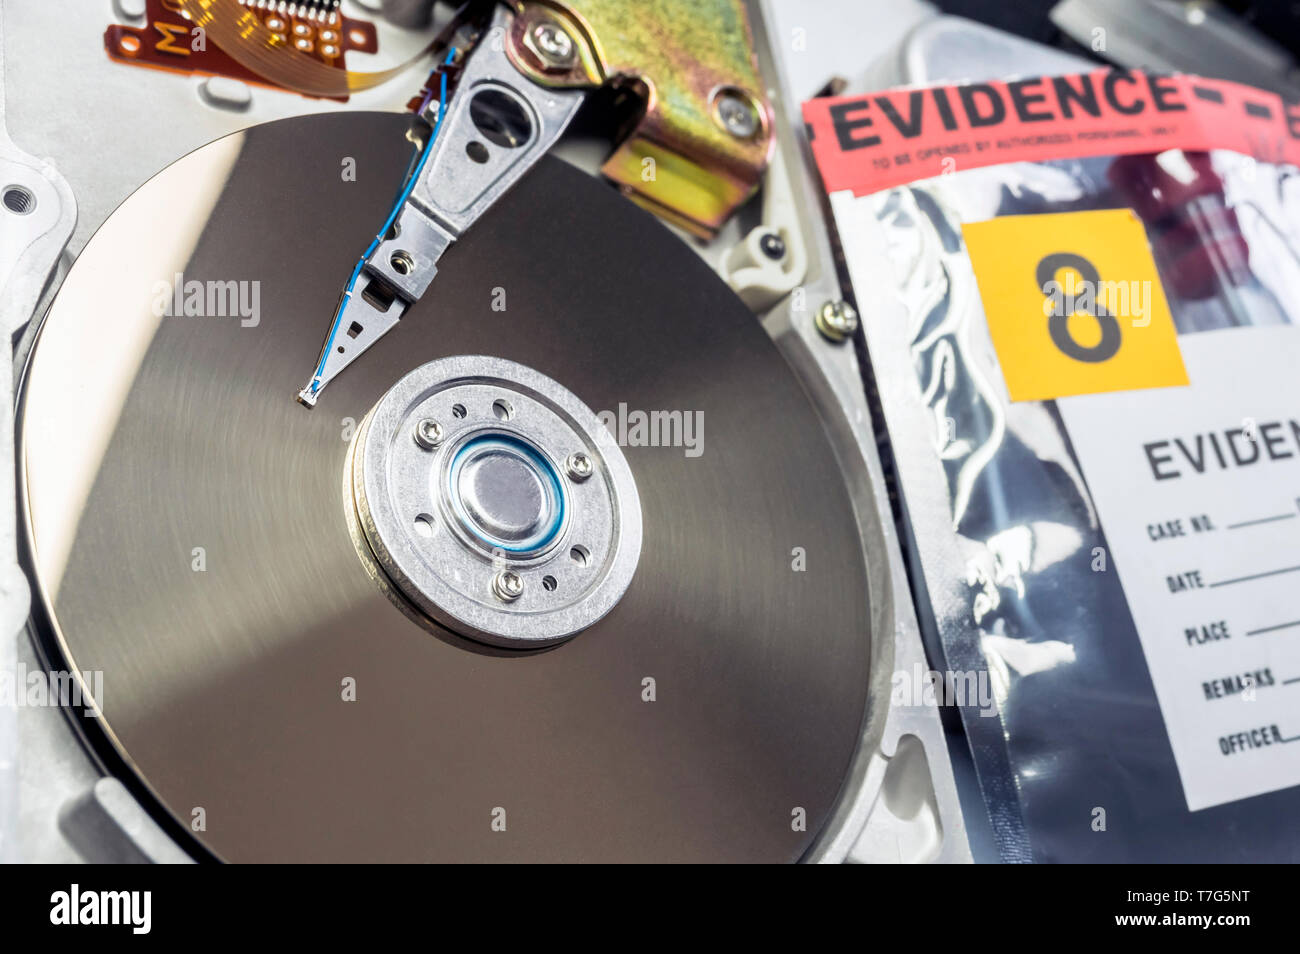 Hard disk opened in criminological laboratory, conceptual image Stock Photo